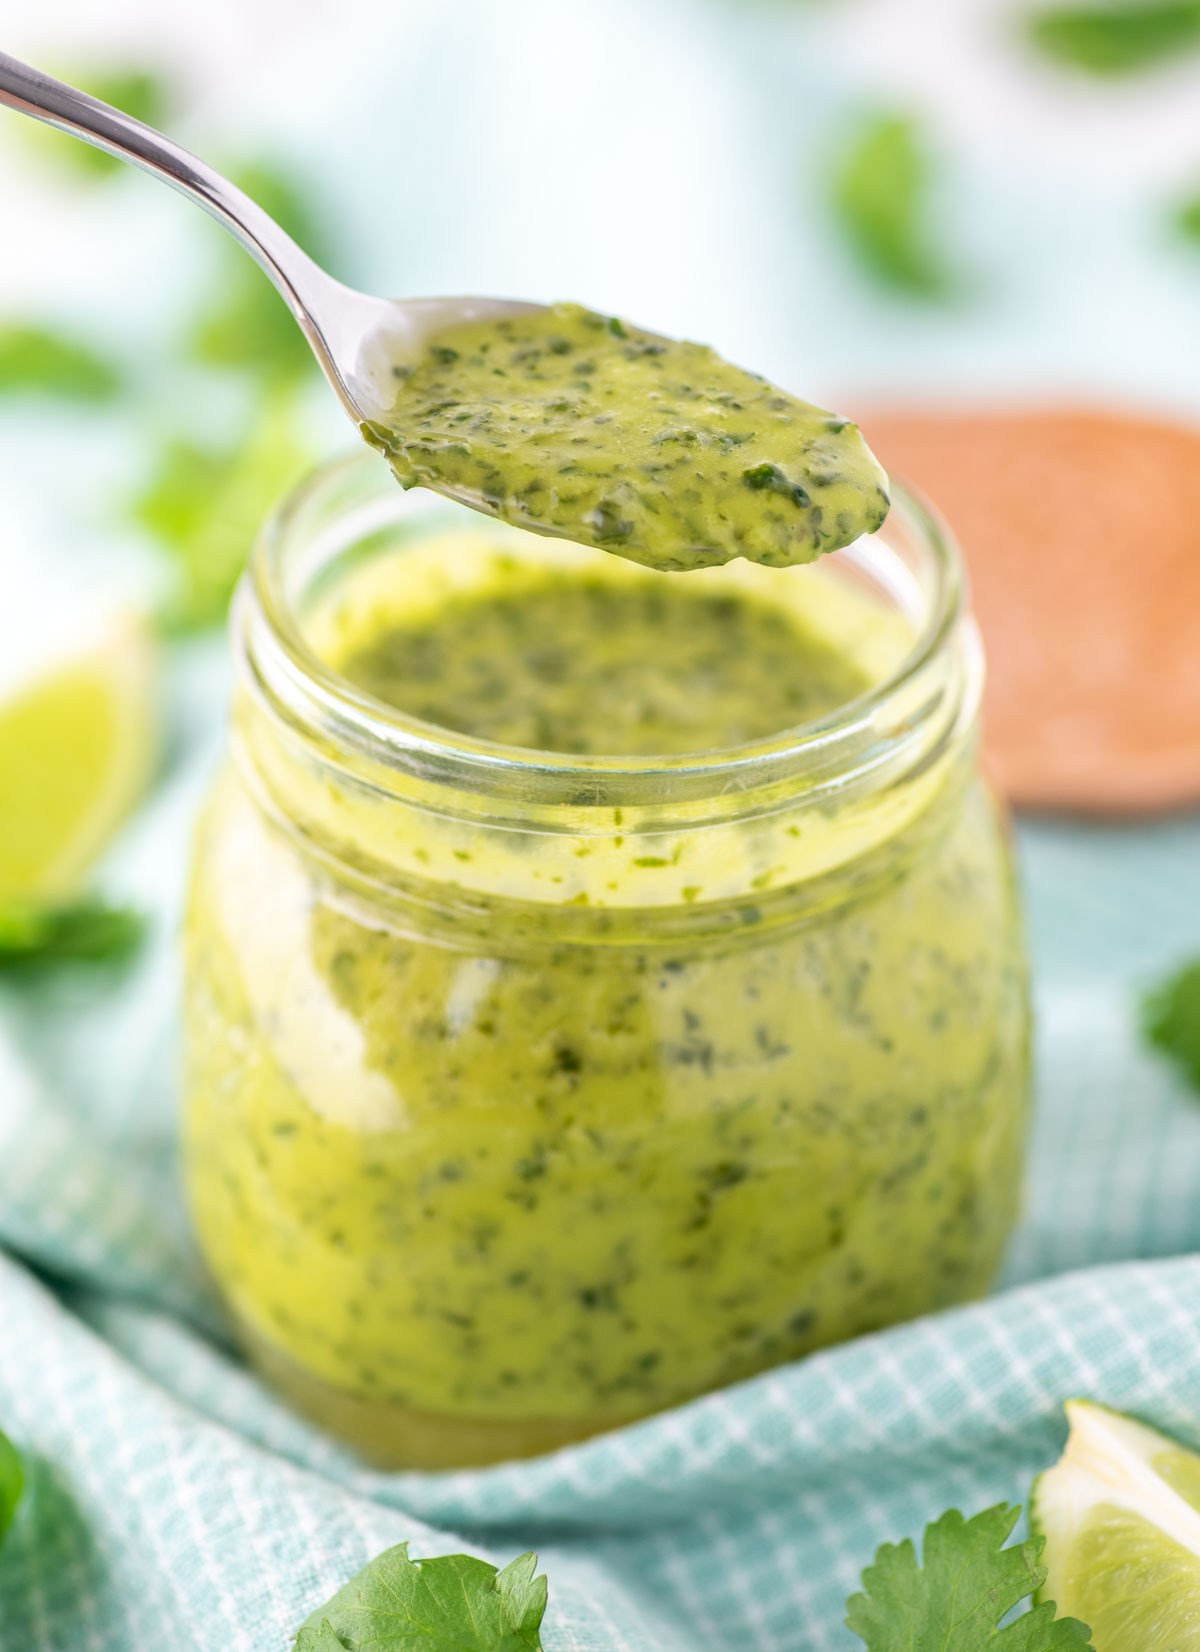 spooning out cilantro lime vinaigrette from jar